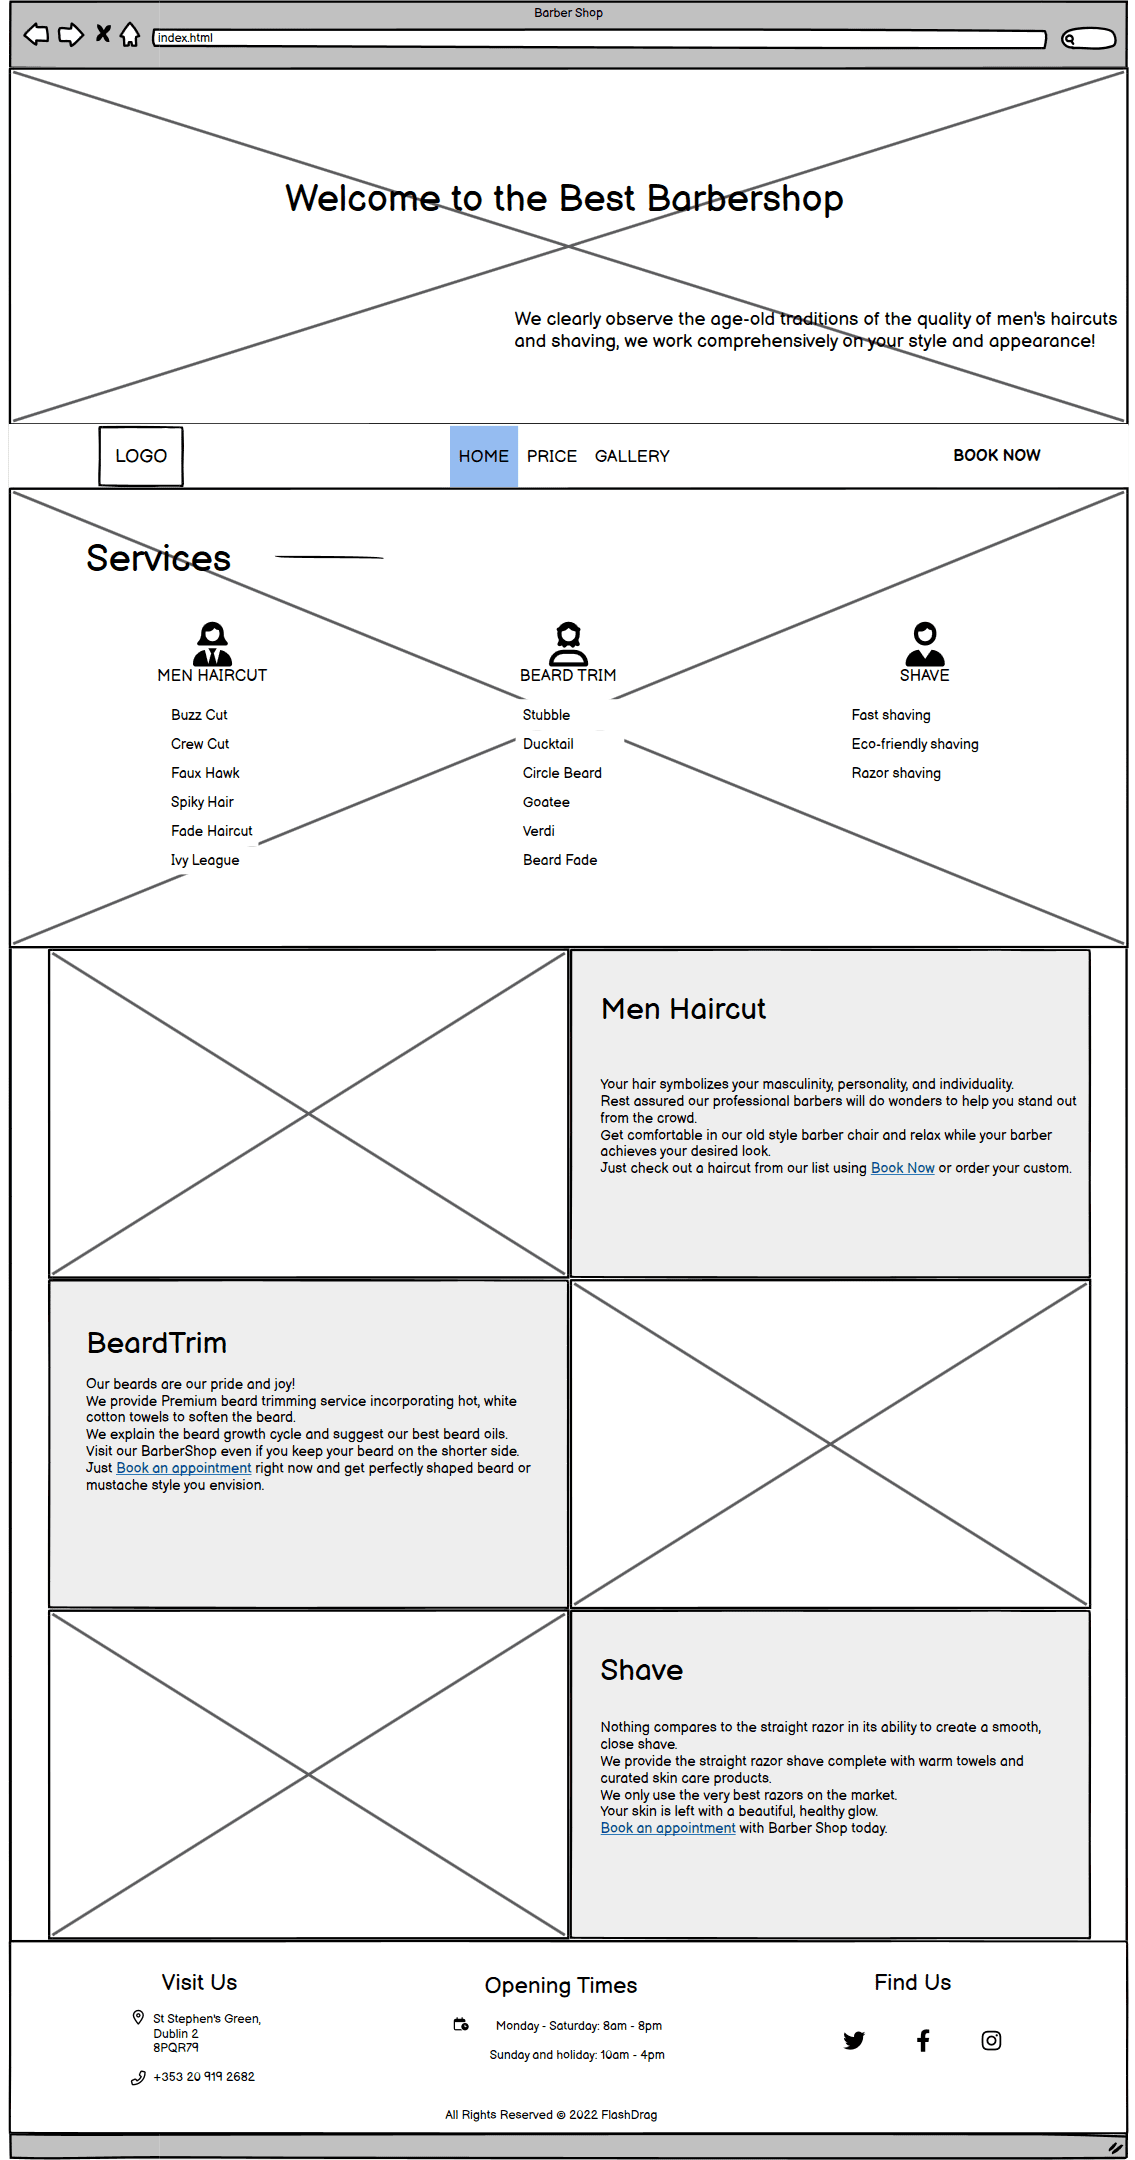 Index page wireframe